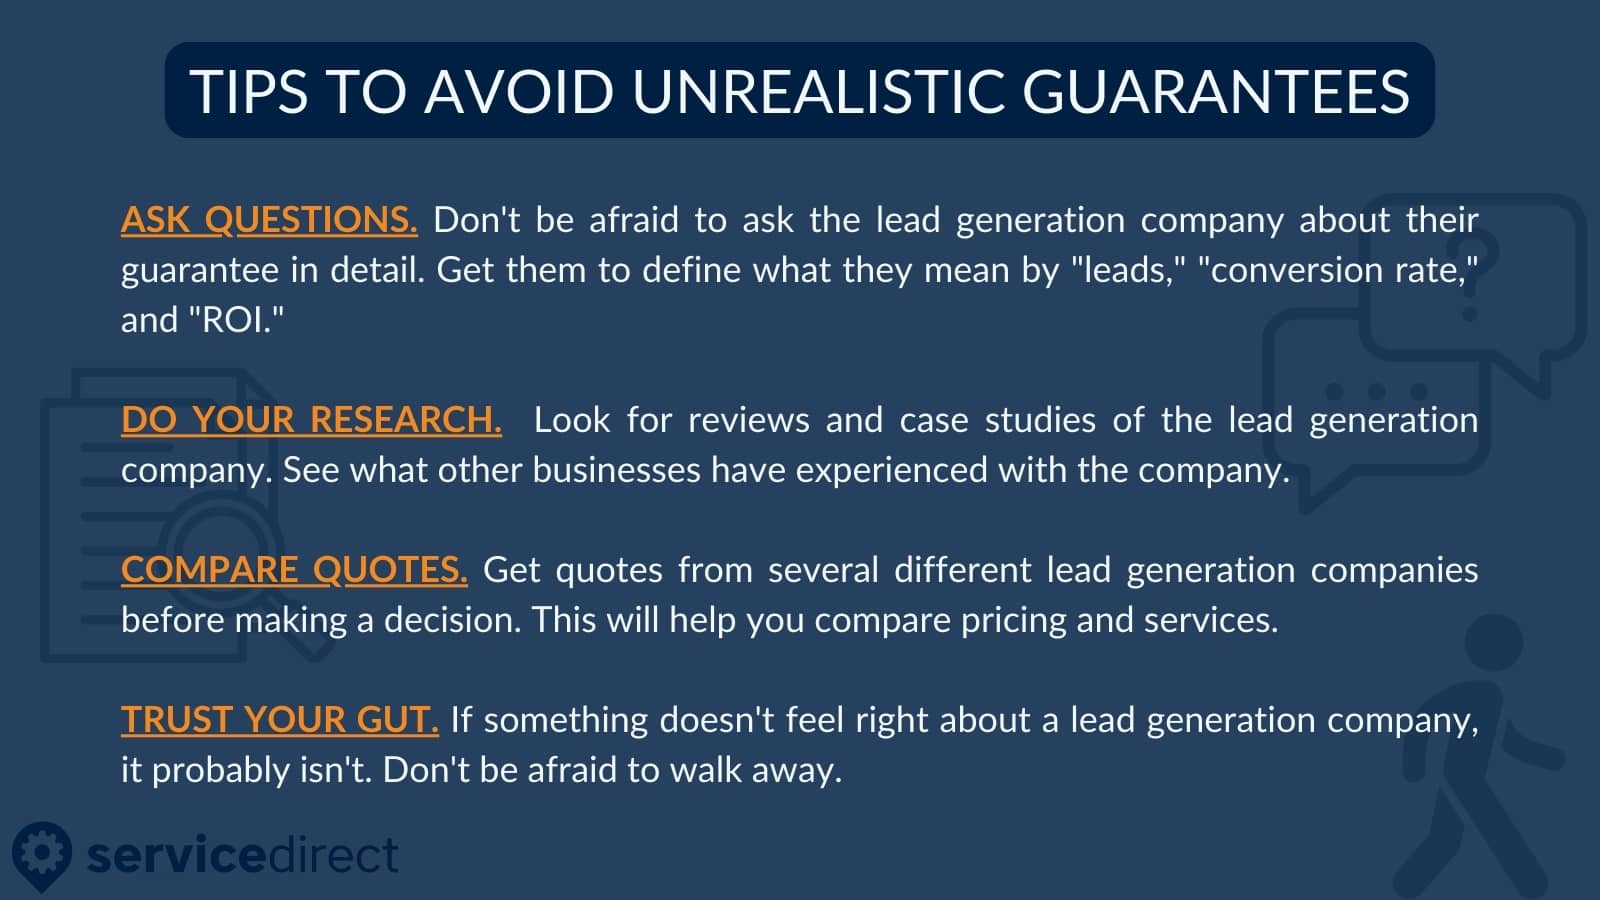 How to Avoid Unrealistic Lead Generation Guarantees